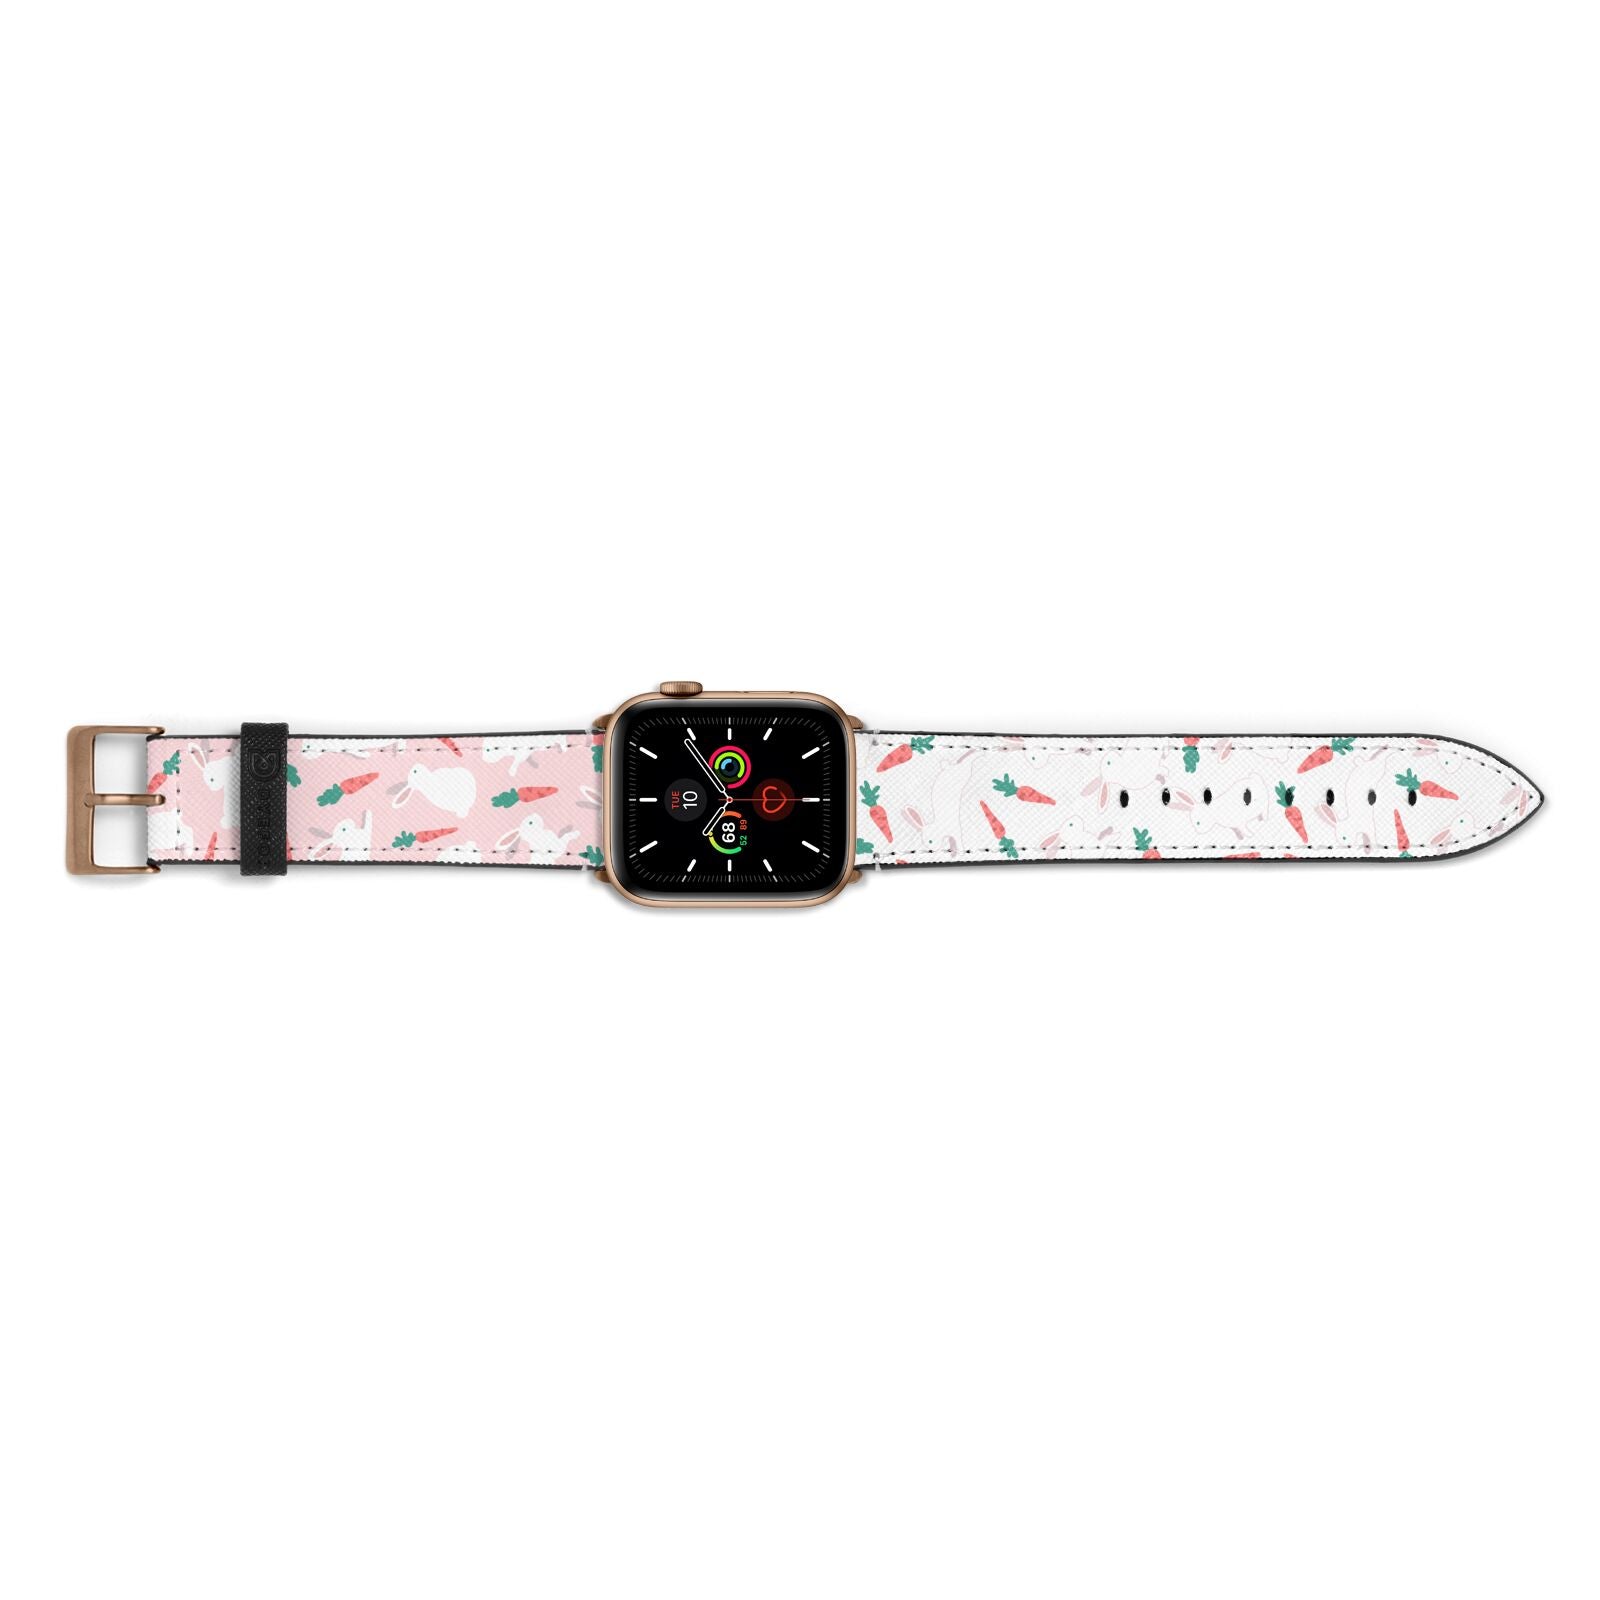 Easter Bunny And Carrot Apple Watch Strap Landscape Image Gold Hardware